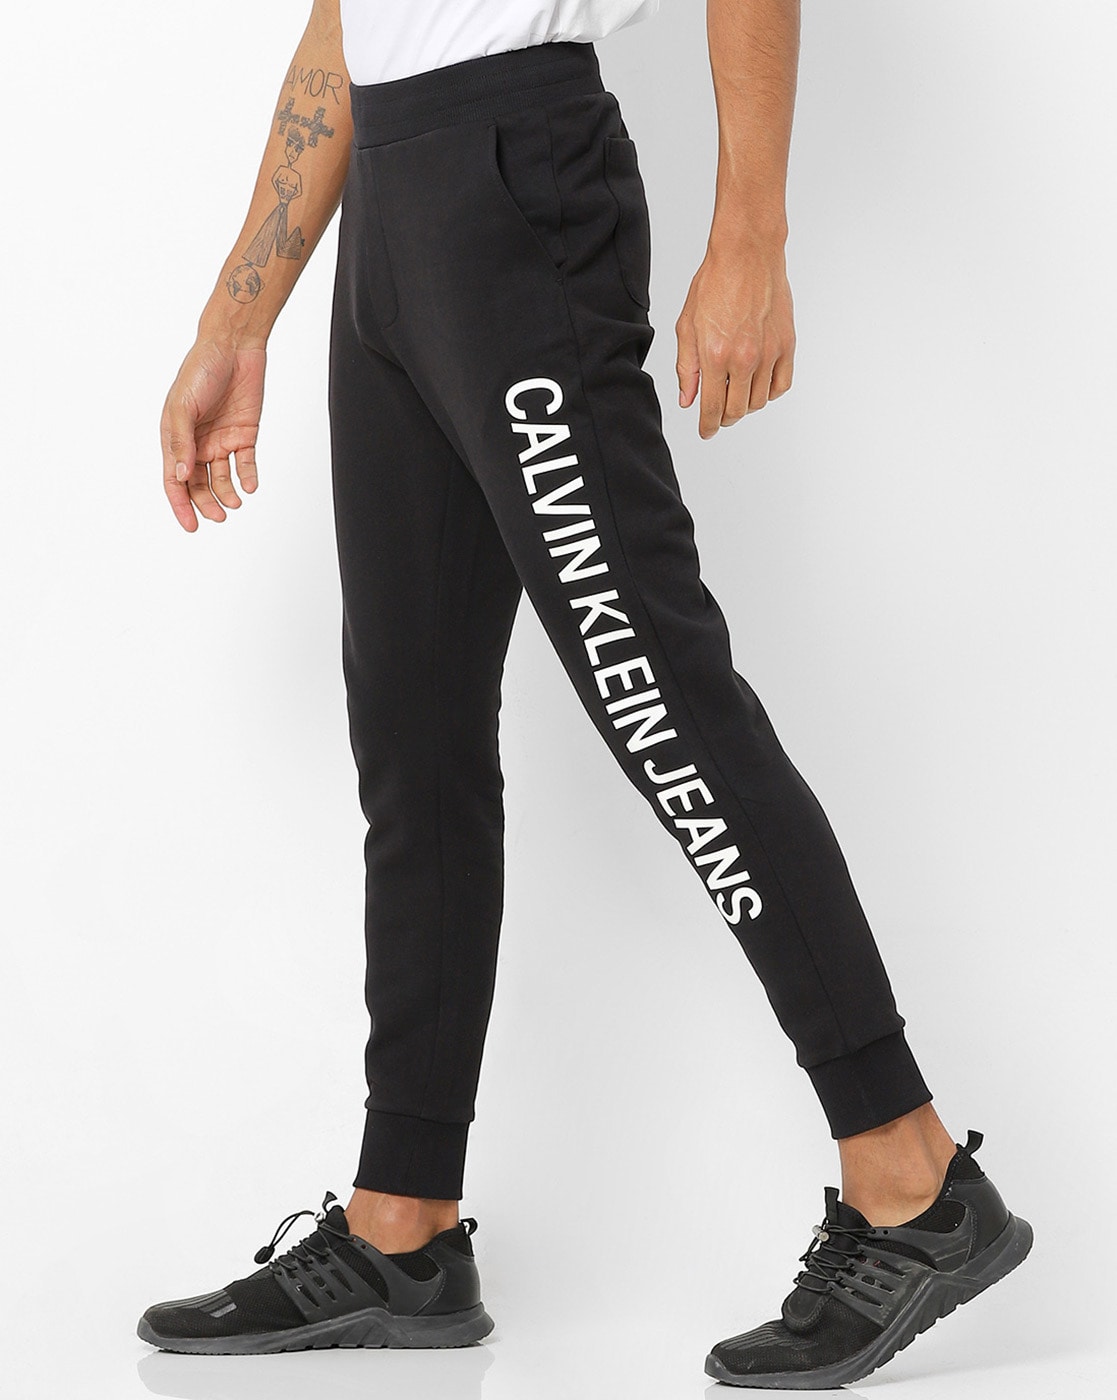 Cotton Joggers with Branding